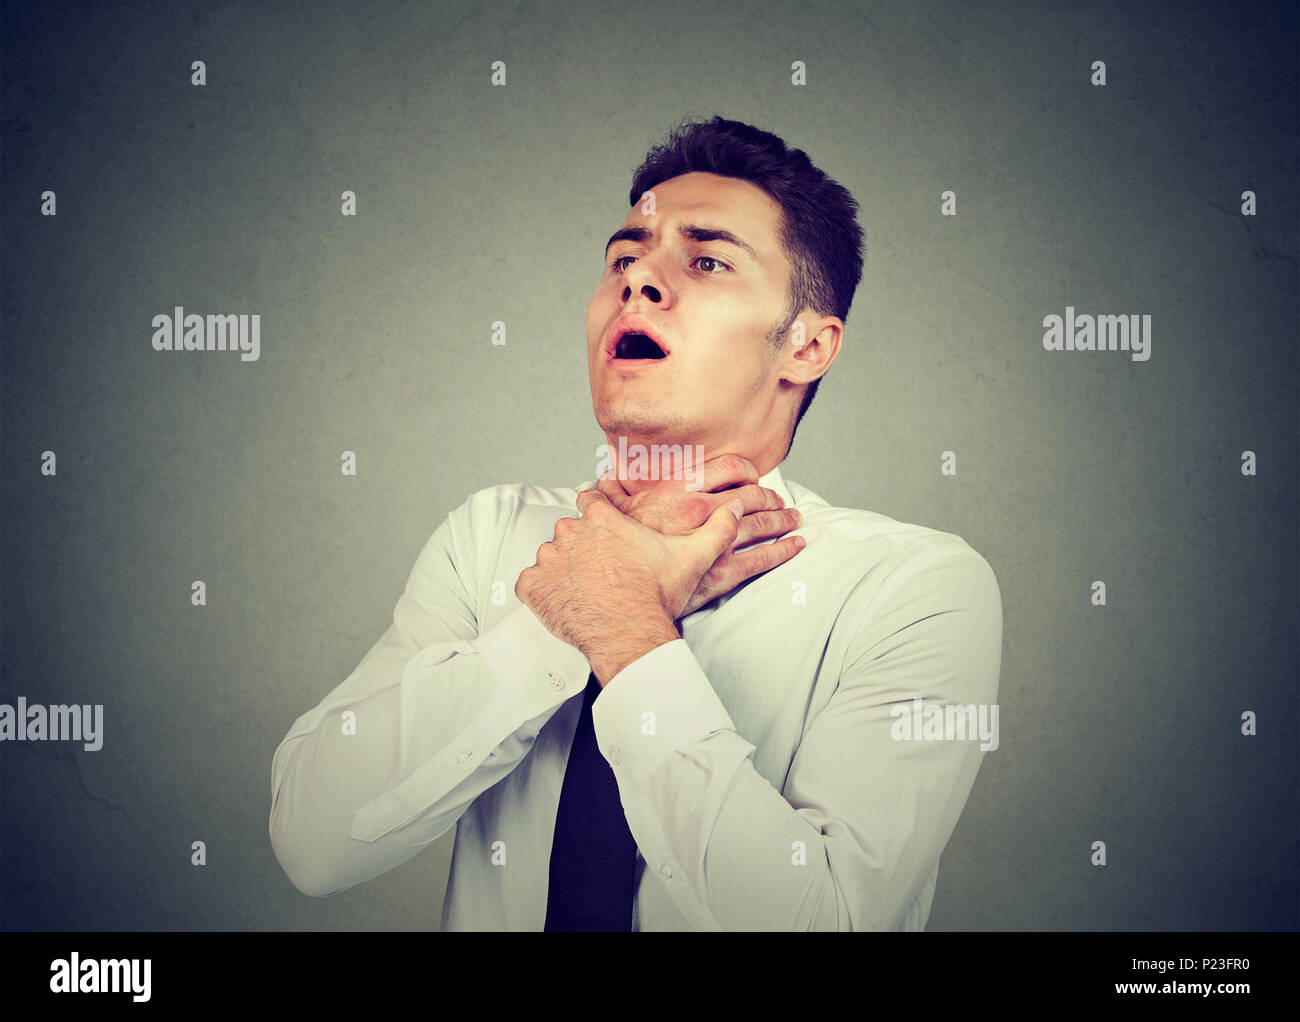 Young man having asthma attack or choking can't breath suffering from respiration problems isolated on gray background Stock Photo